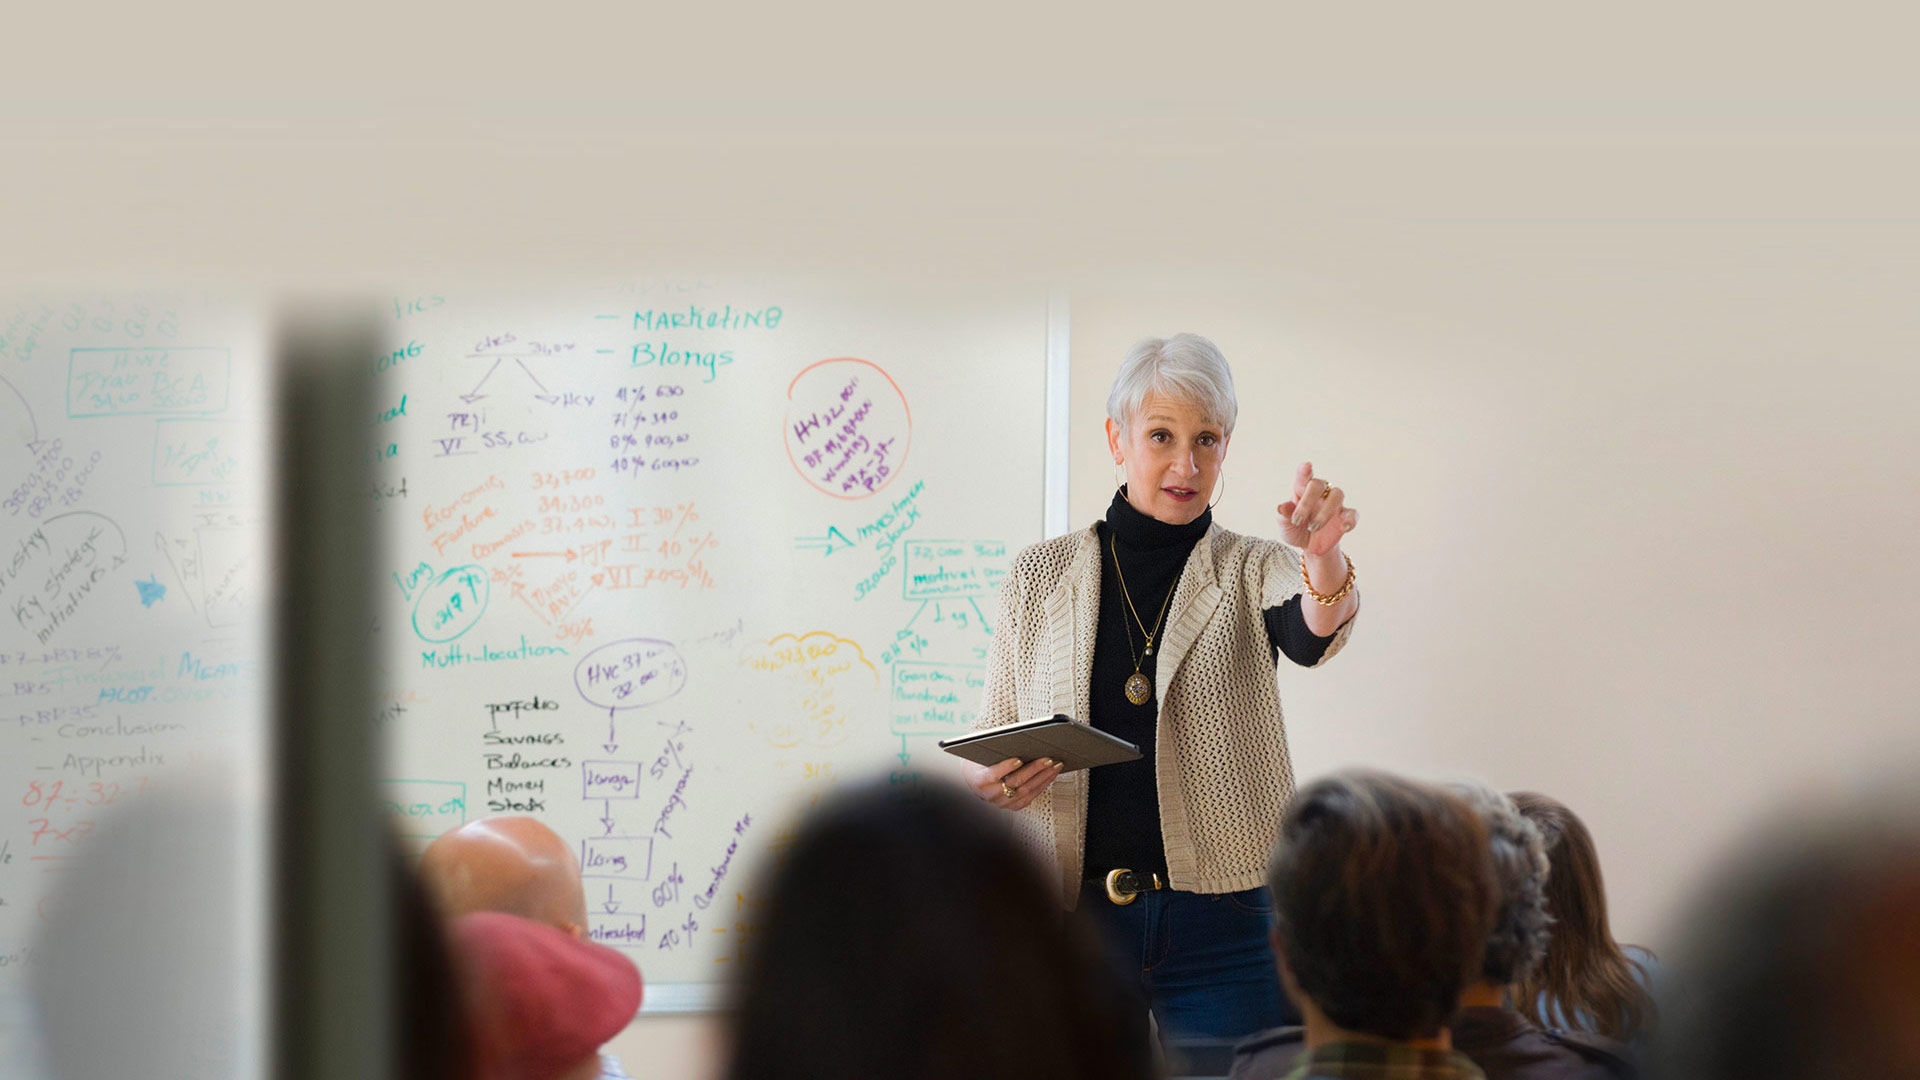 Professor lecturing in front of a whiteboard full of notes points to a student.